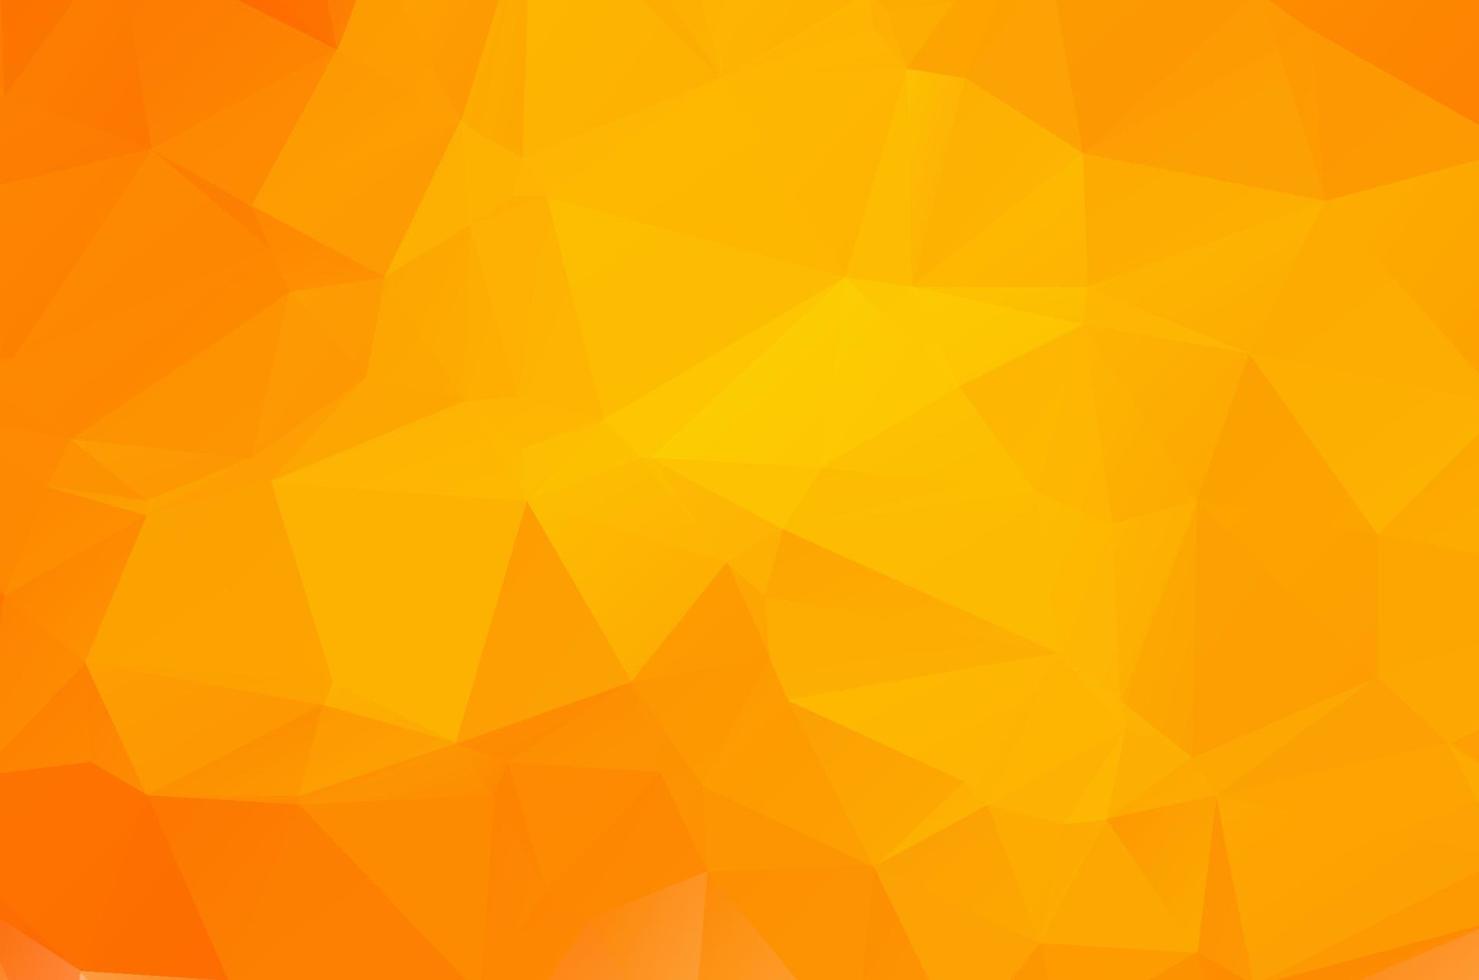 Orange Low poly crystal background. Polygon design pattern. environment green Low poly vector illustration, low polygon background.